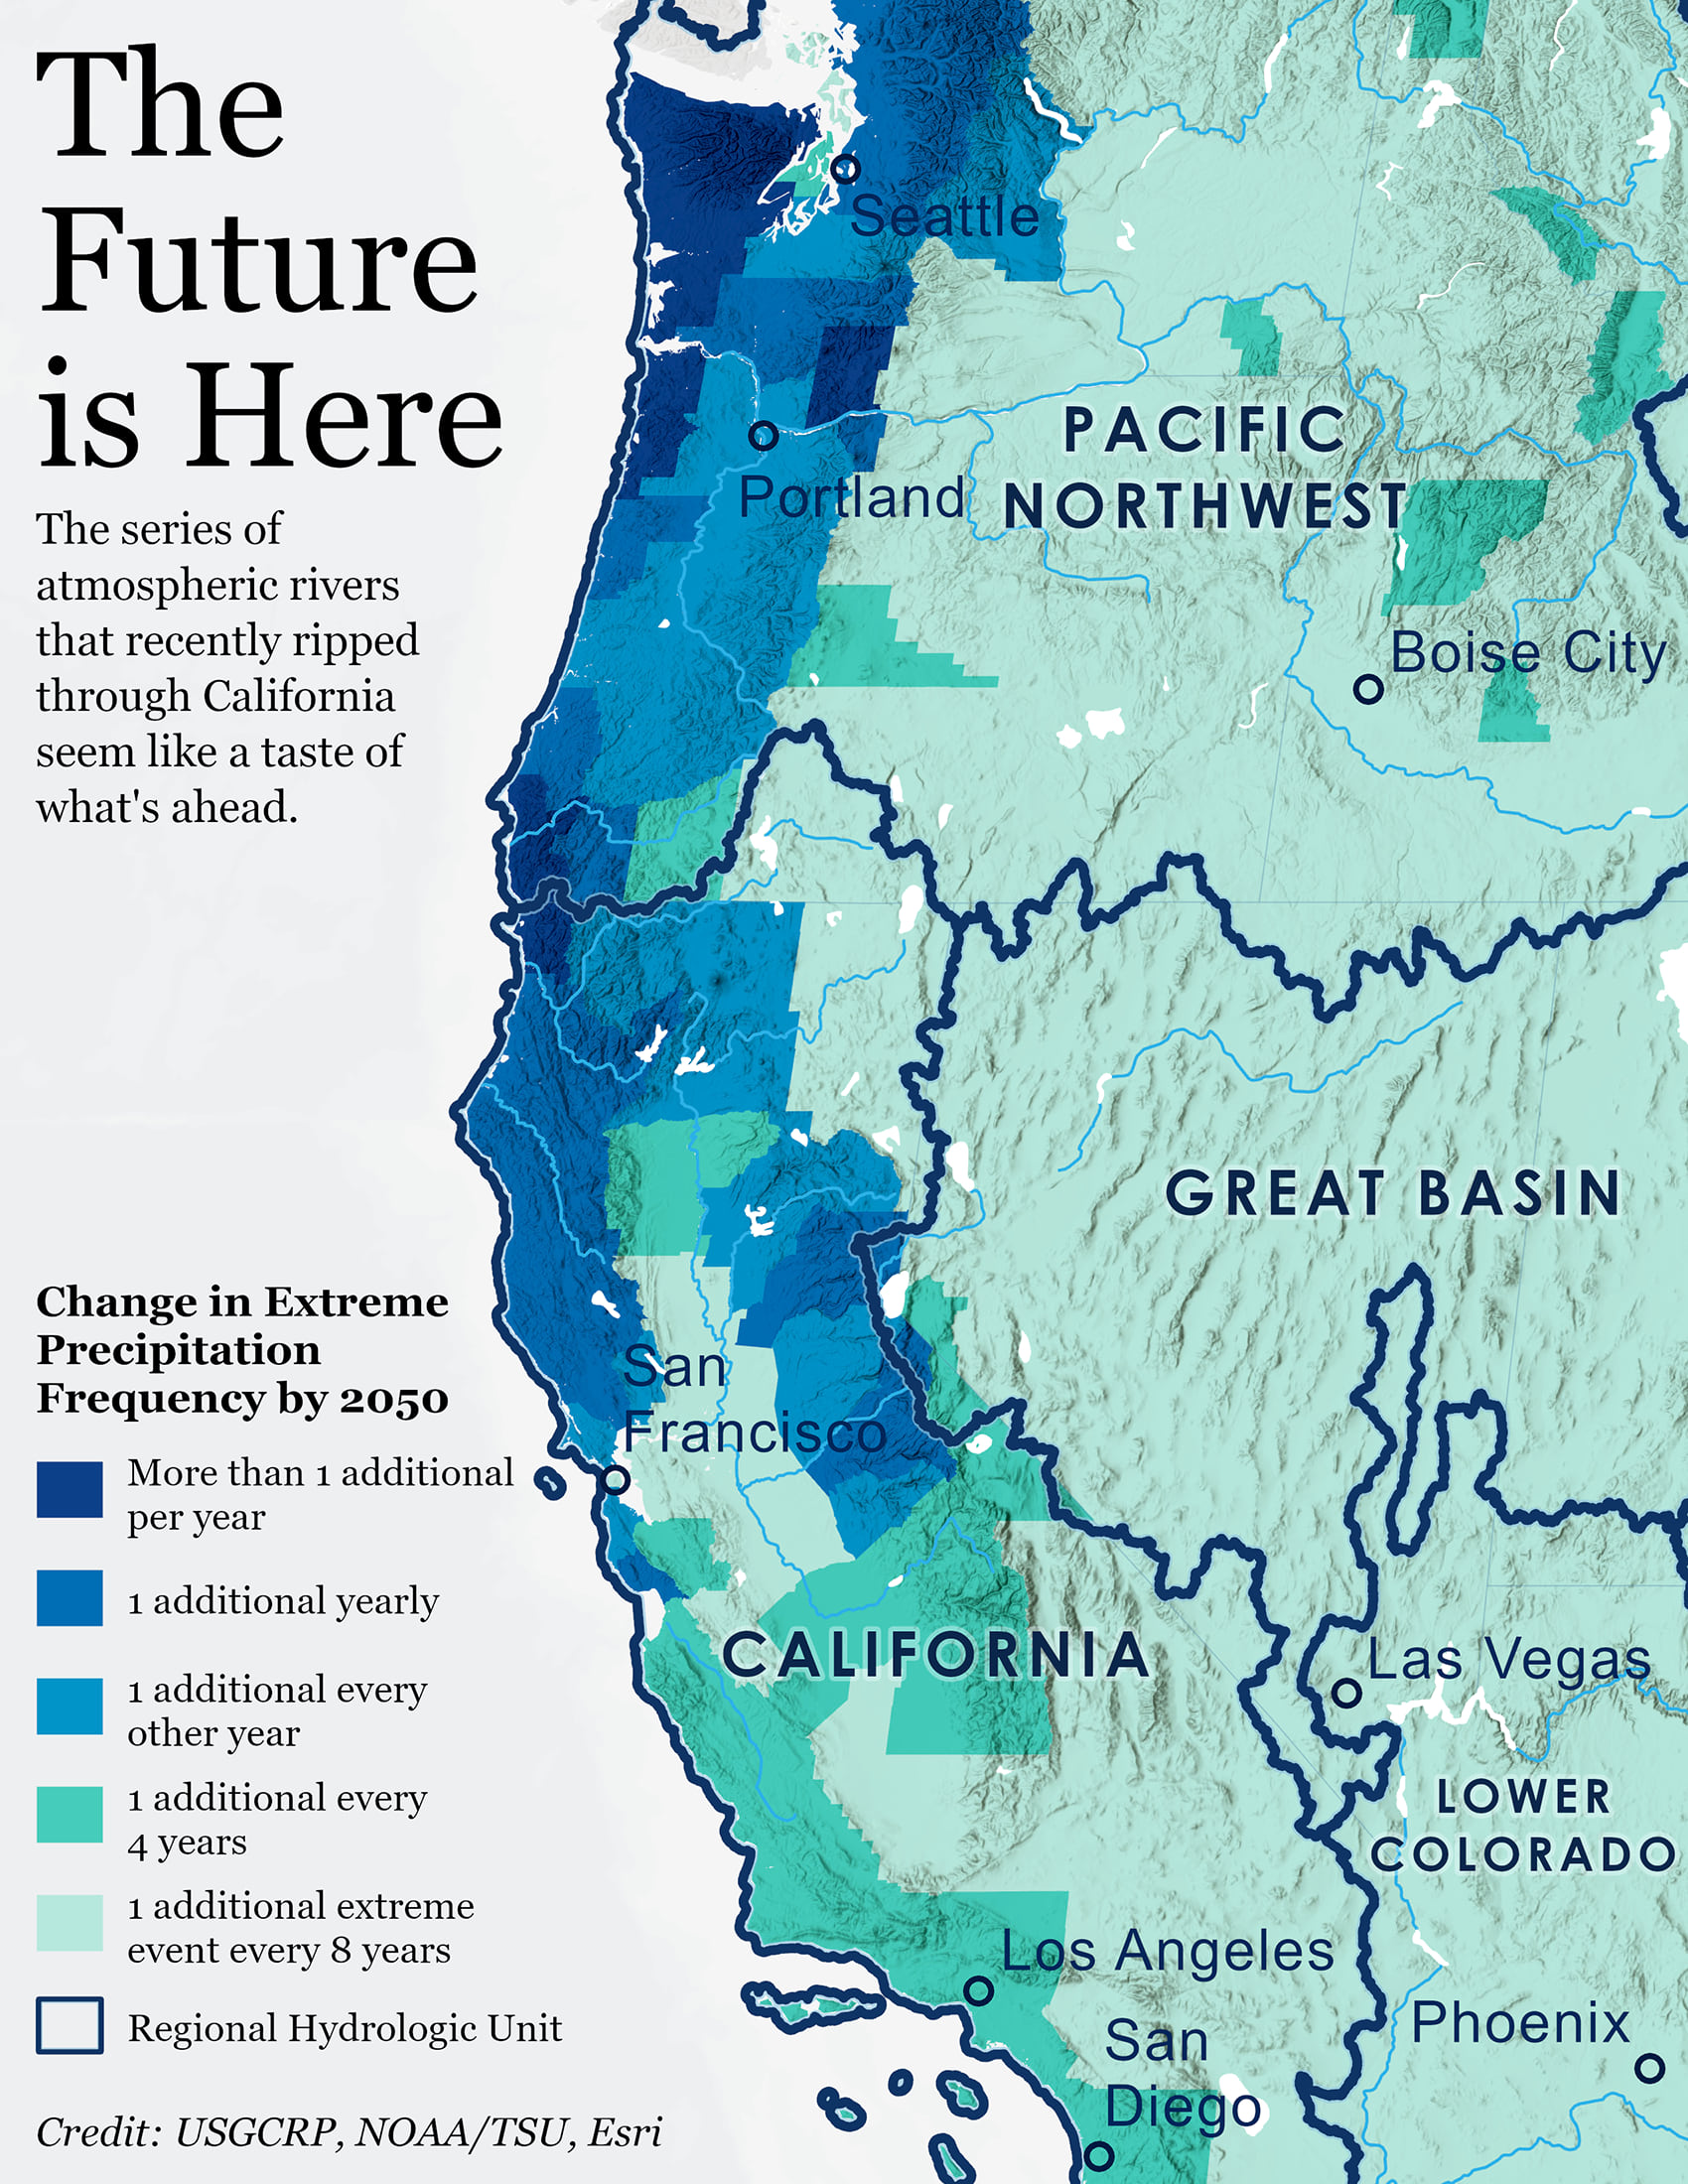 Detailed view of extreme precipitation frequency increases along the California, Oregon, and Washington coastlines. A series of atmospheric rivers battered this area in early 2023.